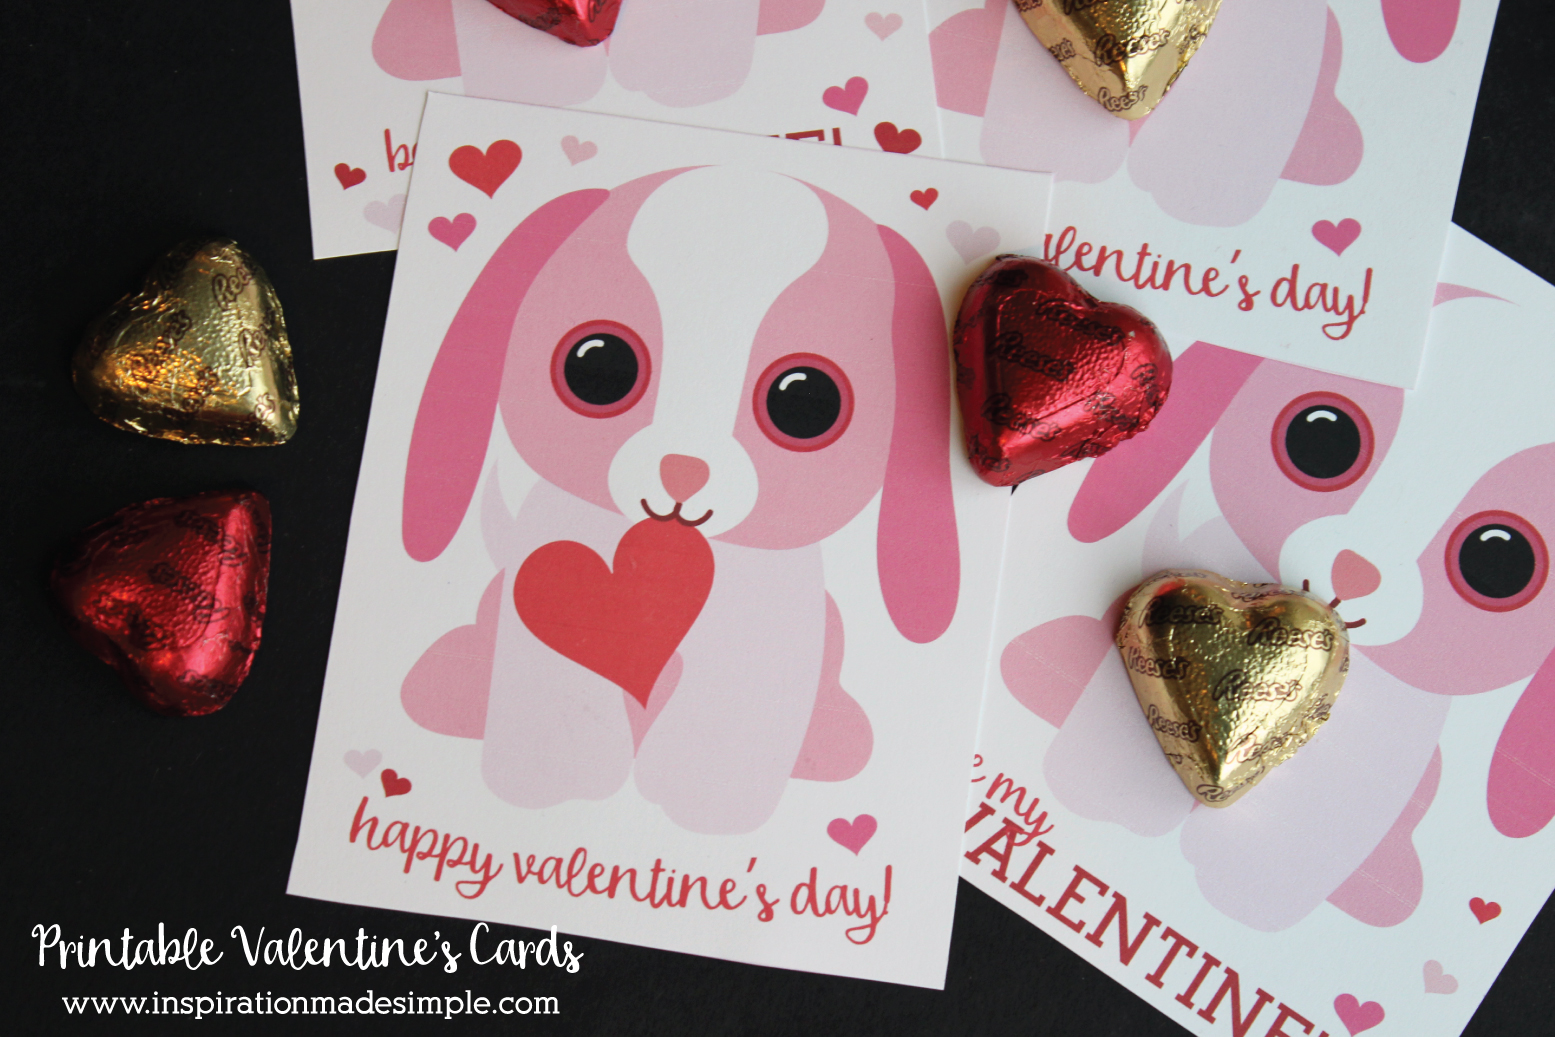 Printable Puppy Valentine's Day Cards - use alone or paired with a chocolate heart for a sweet valentine treat!